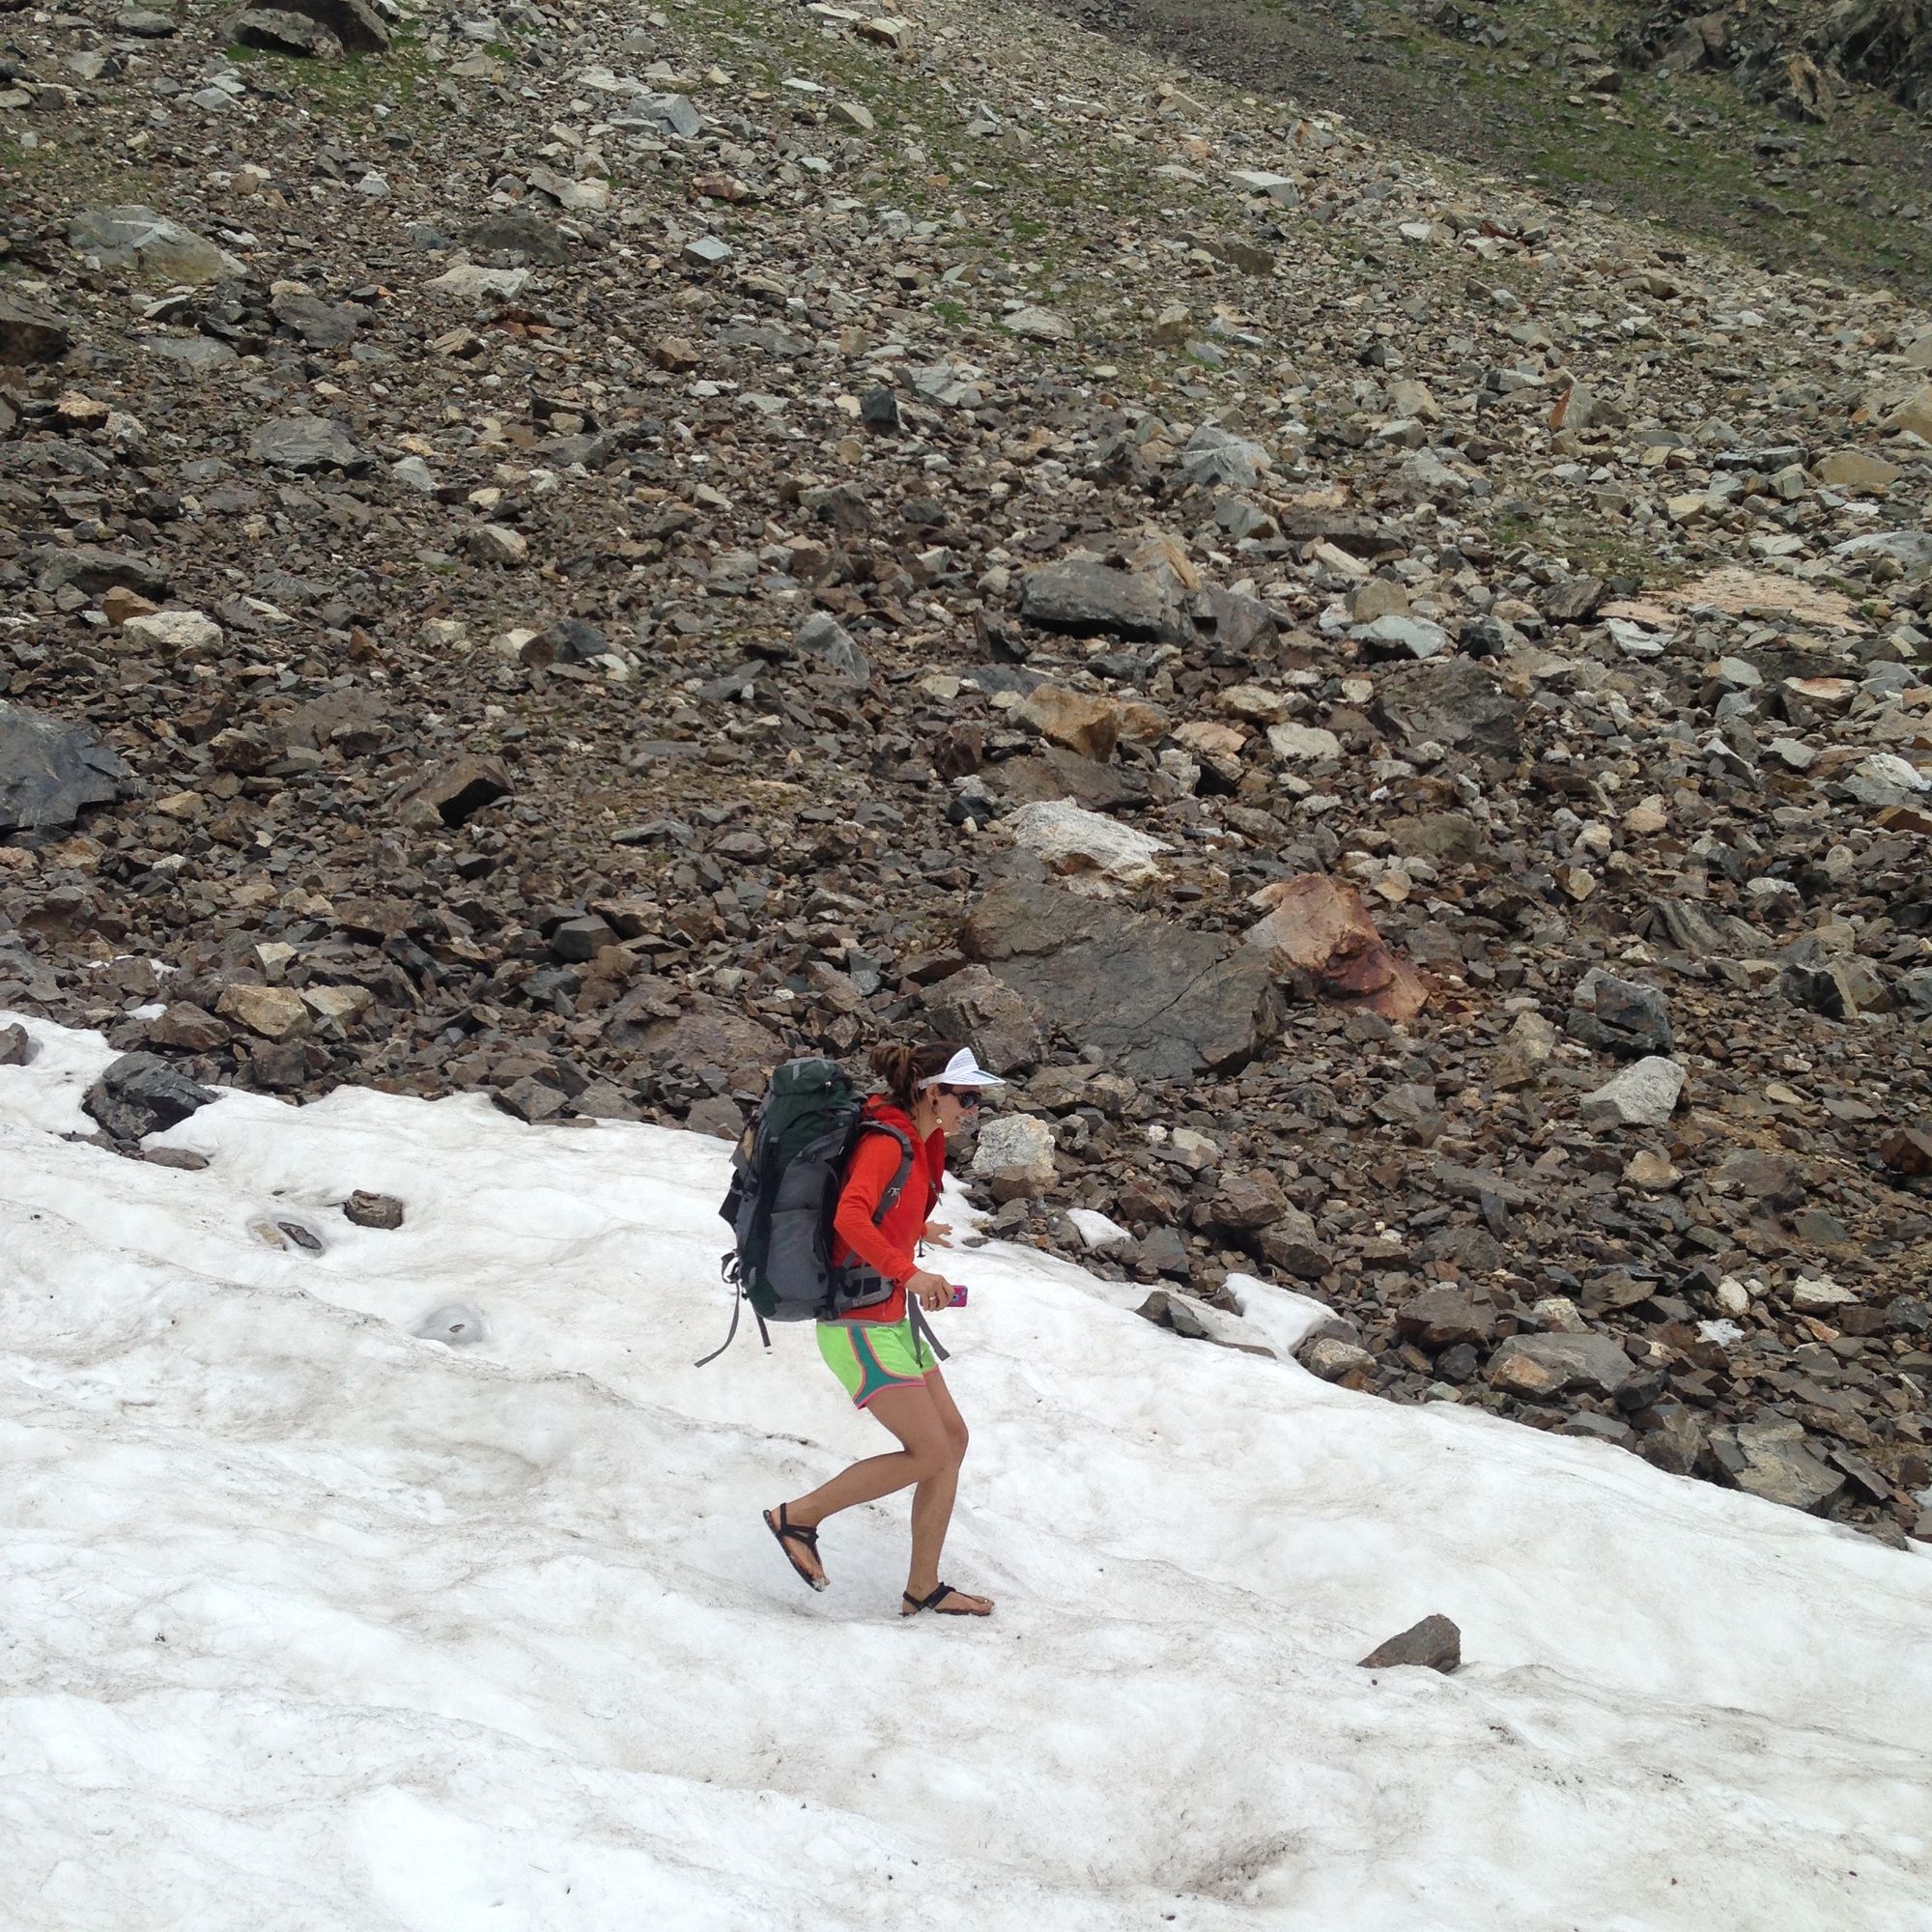 Woman wearing orange shirt and large backpack walks on a snow covered spree field